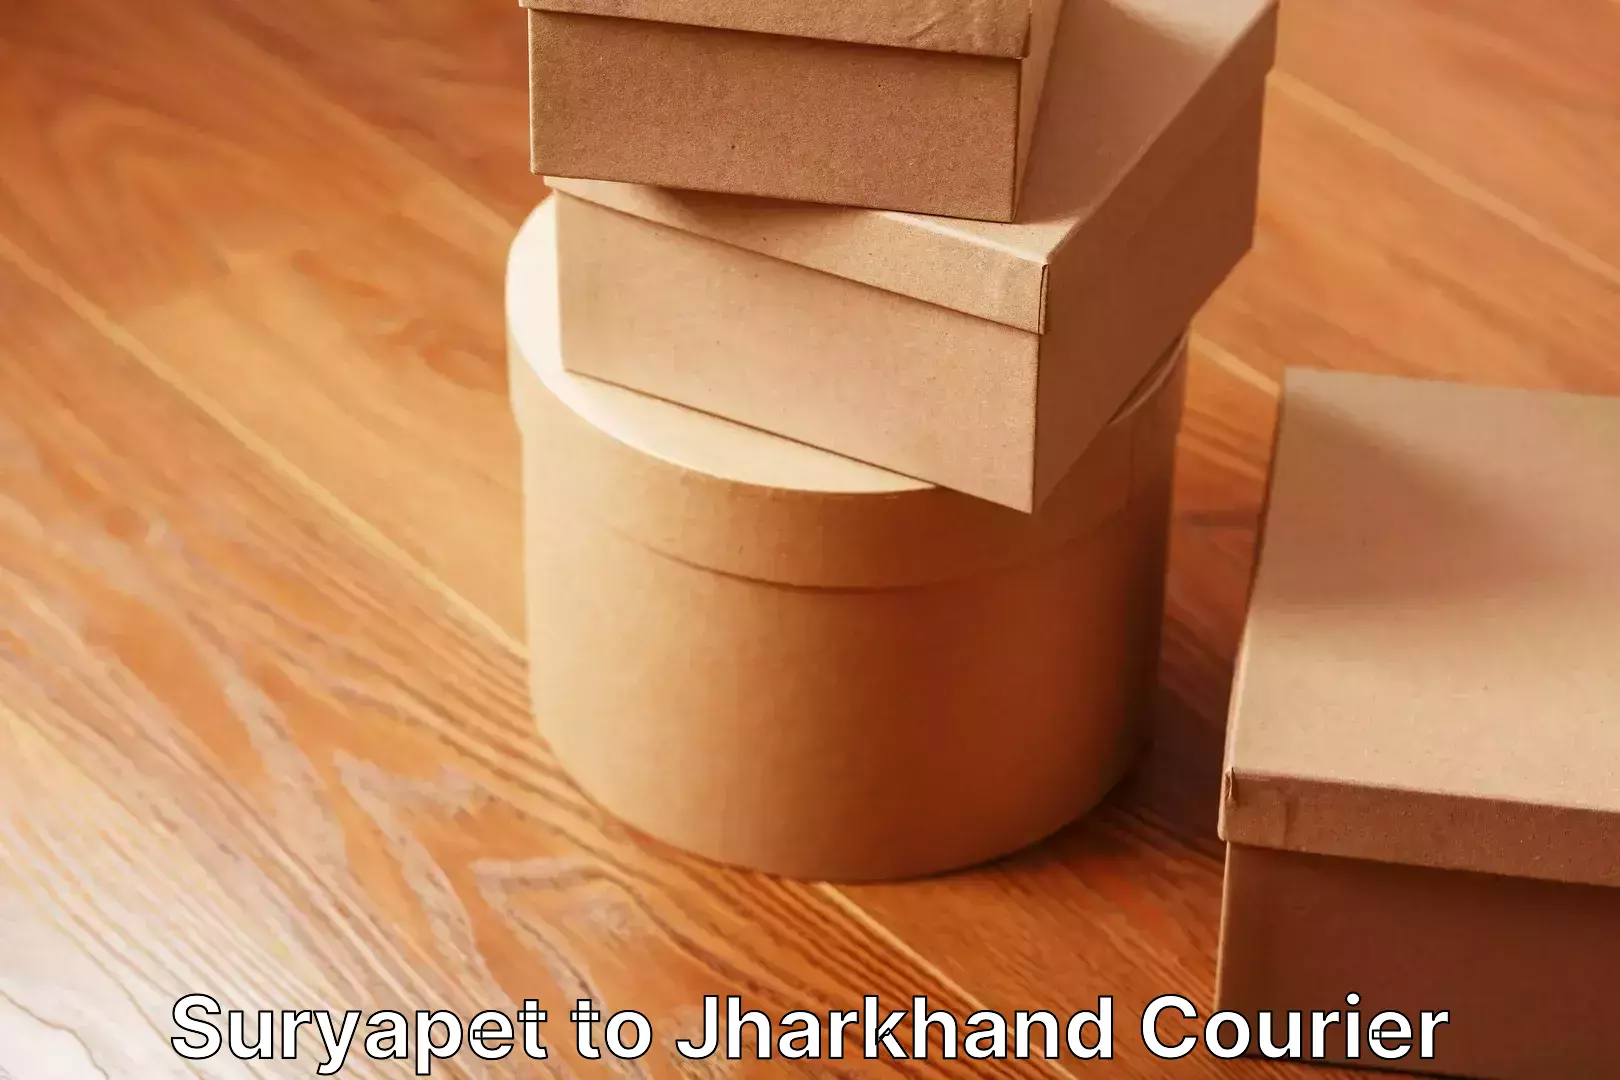 Home moving specialists Suryapet to Jharkhand